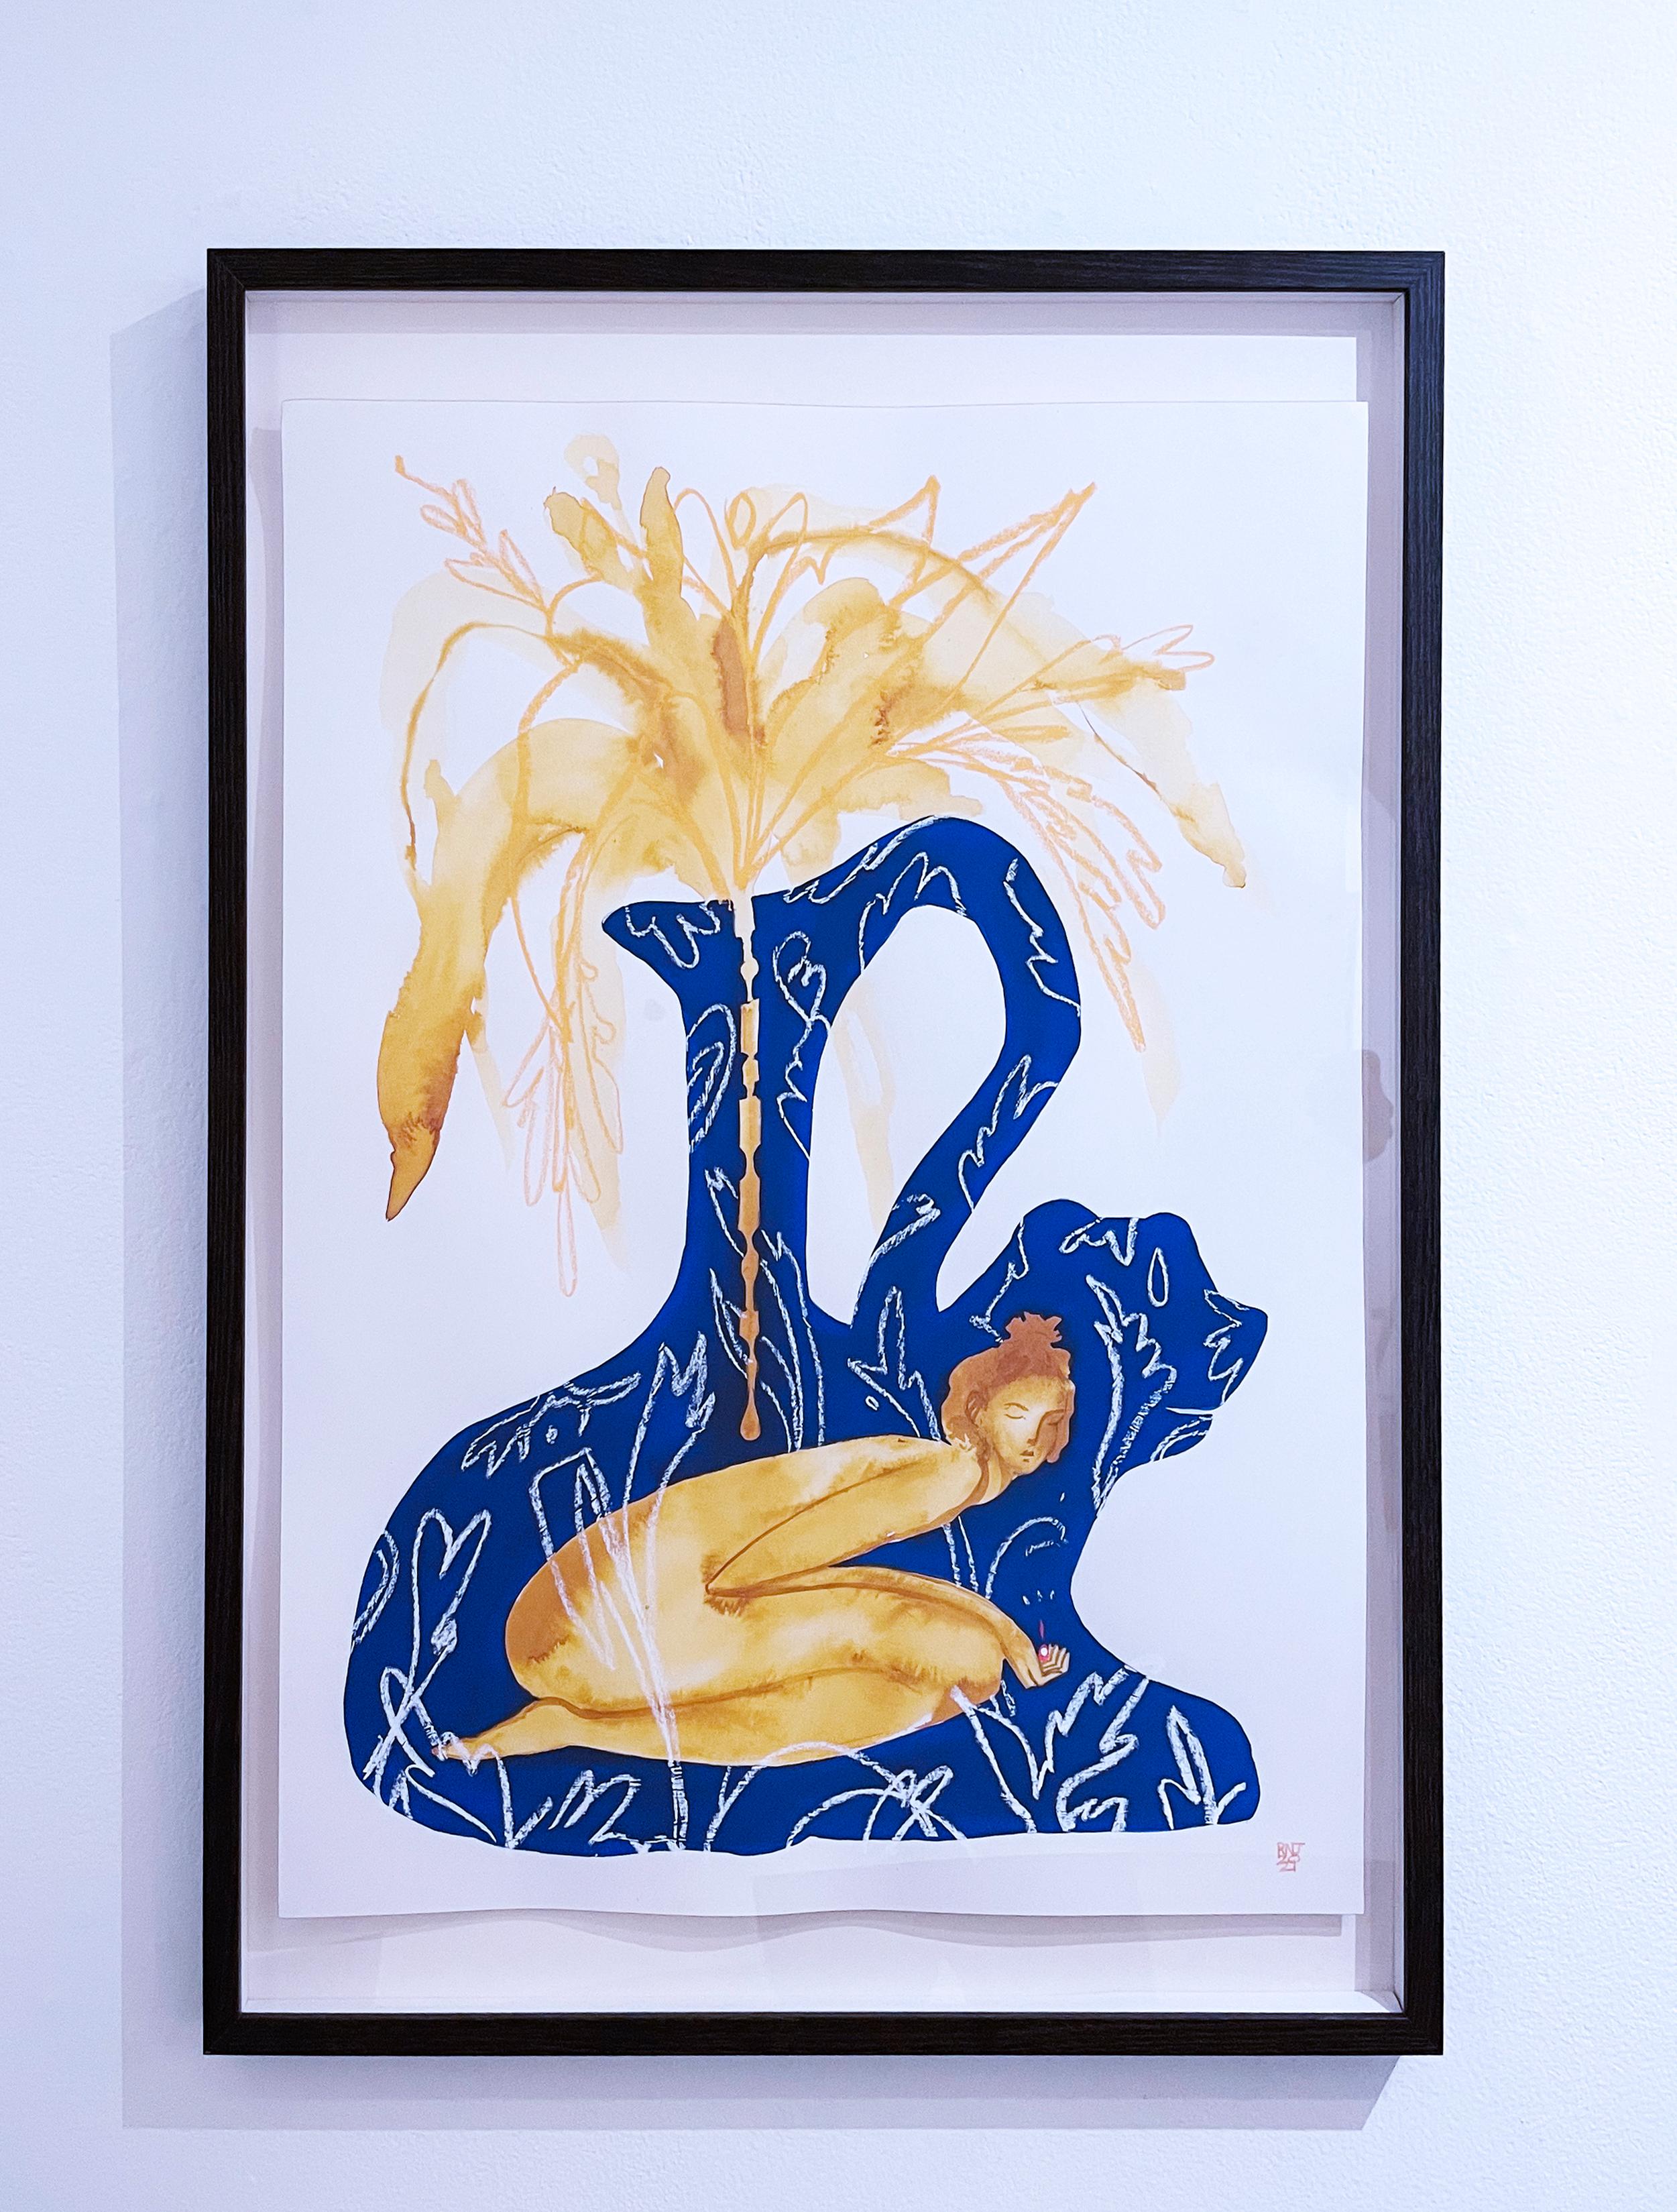 Take With Water, 2021, female figure, vase & plants, blue & gold painting - Painting by Rebecca Johnson